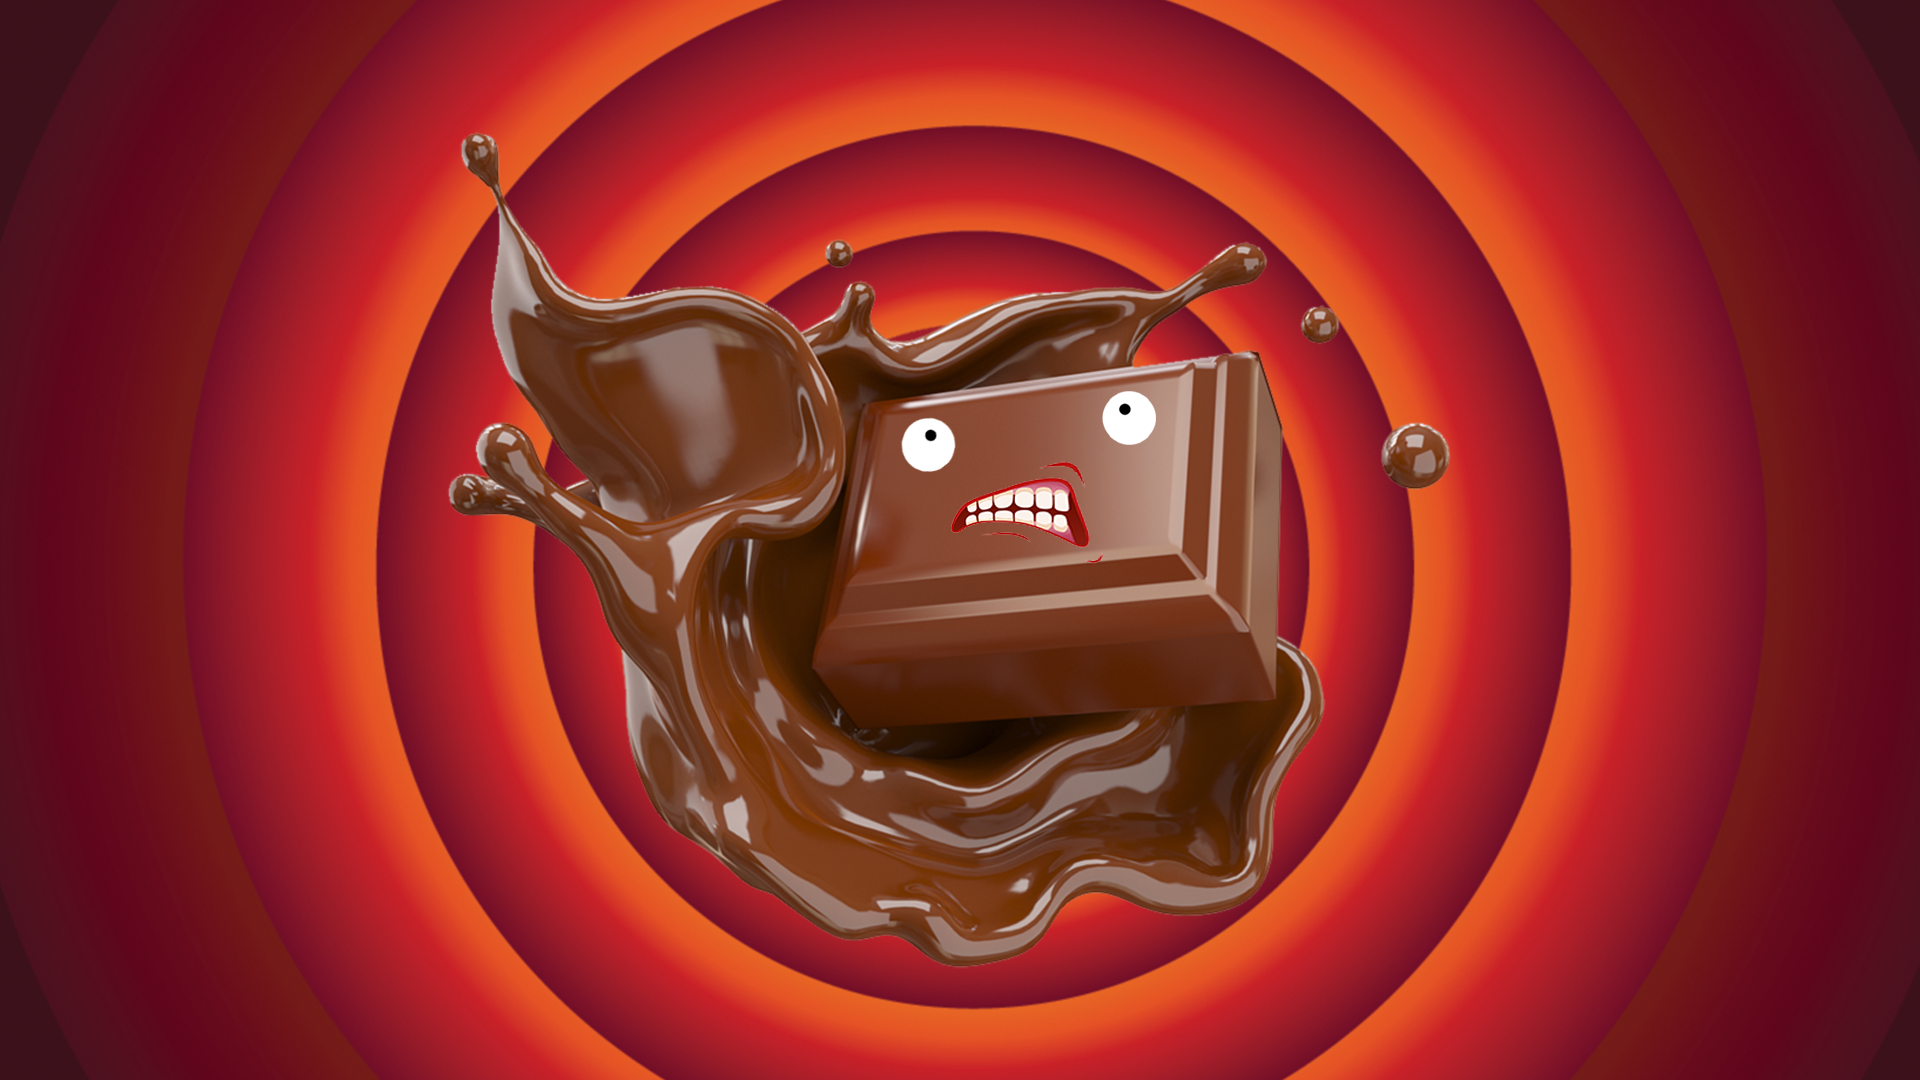 An angry looking piece of chocolate in front of an orange and red back background